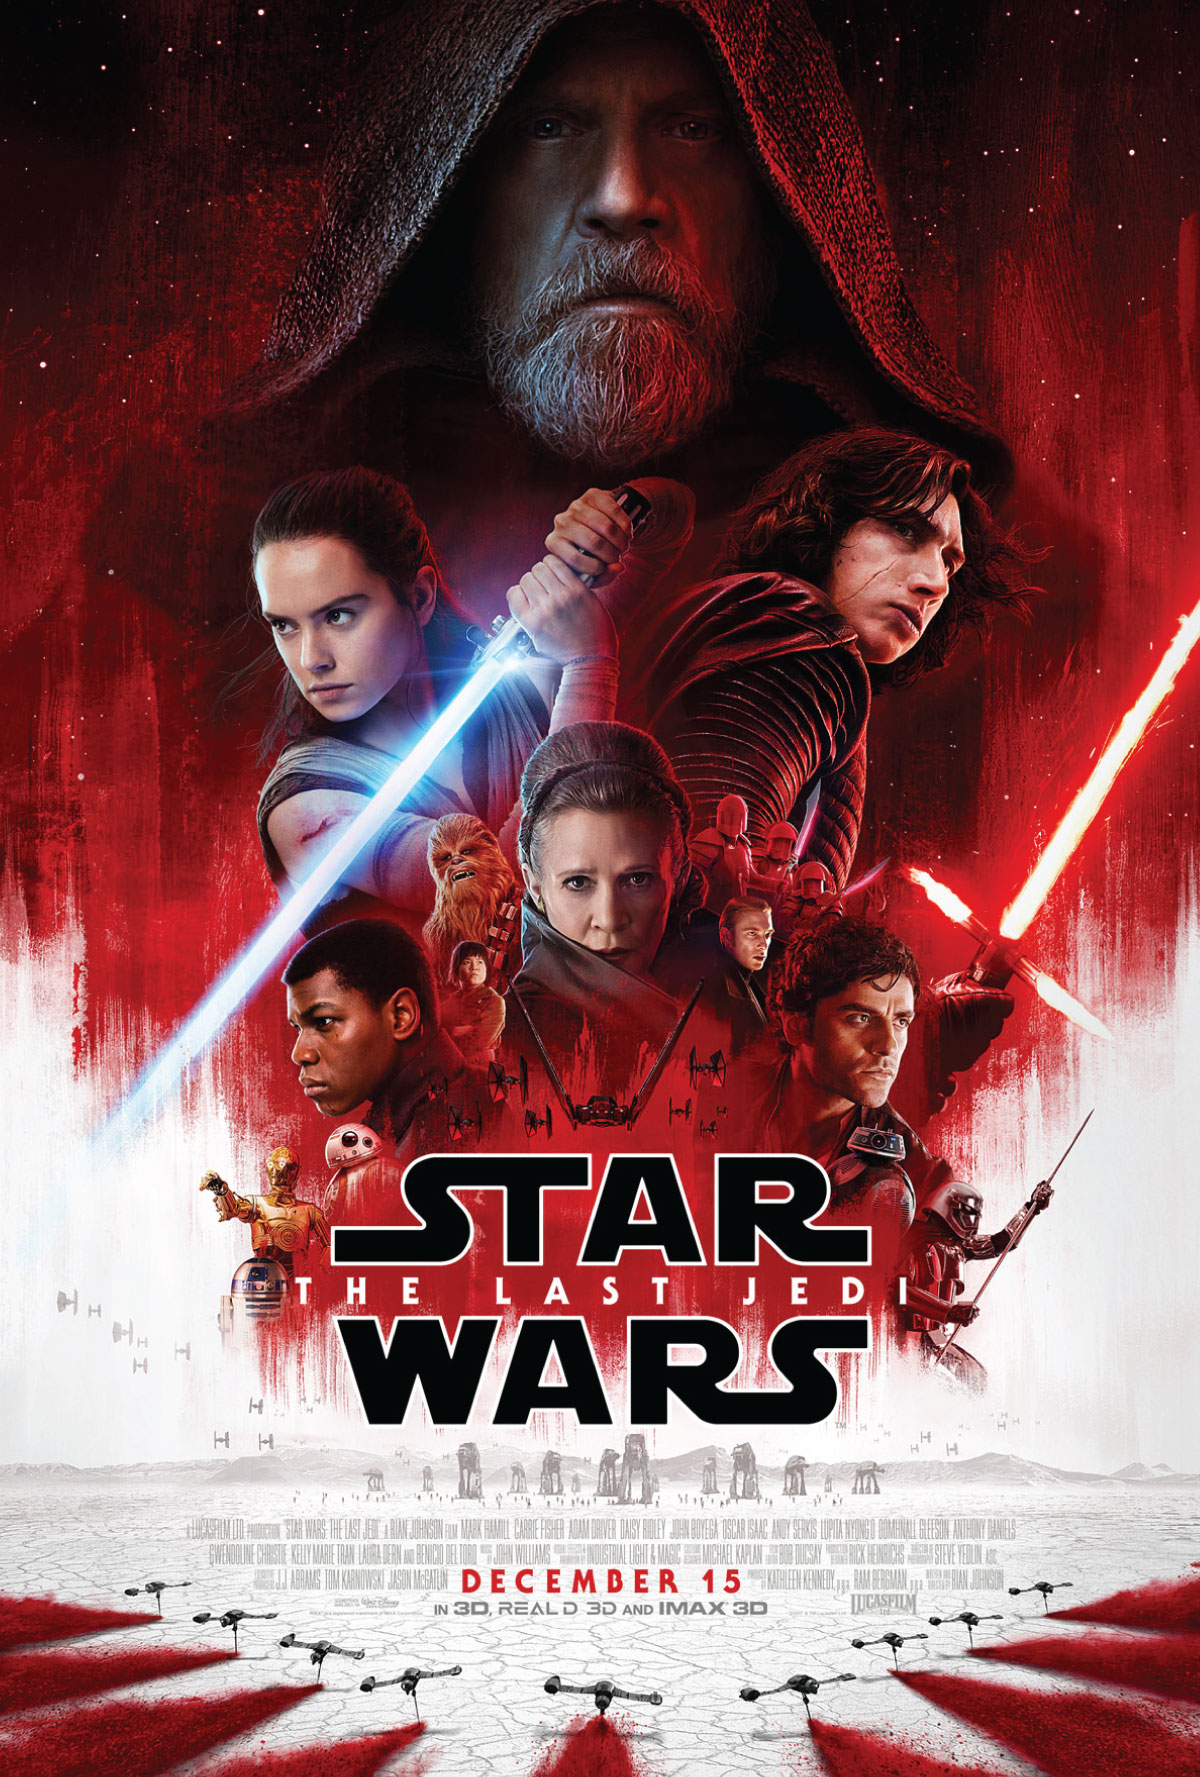 "Star Wars: The Last Jedi" with The Hit House's trailer music work.